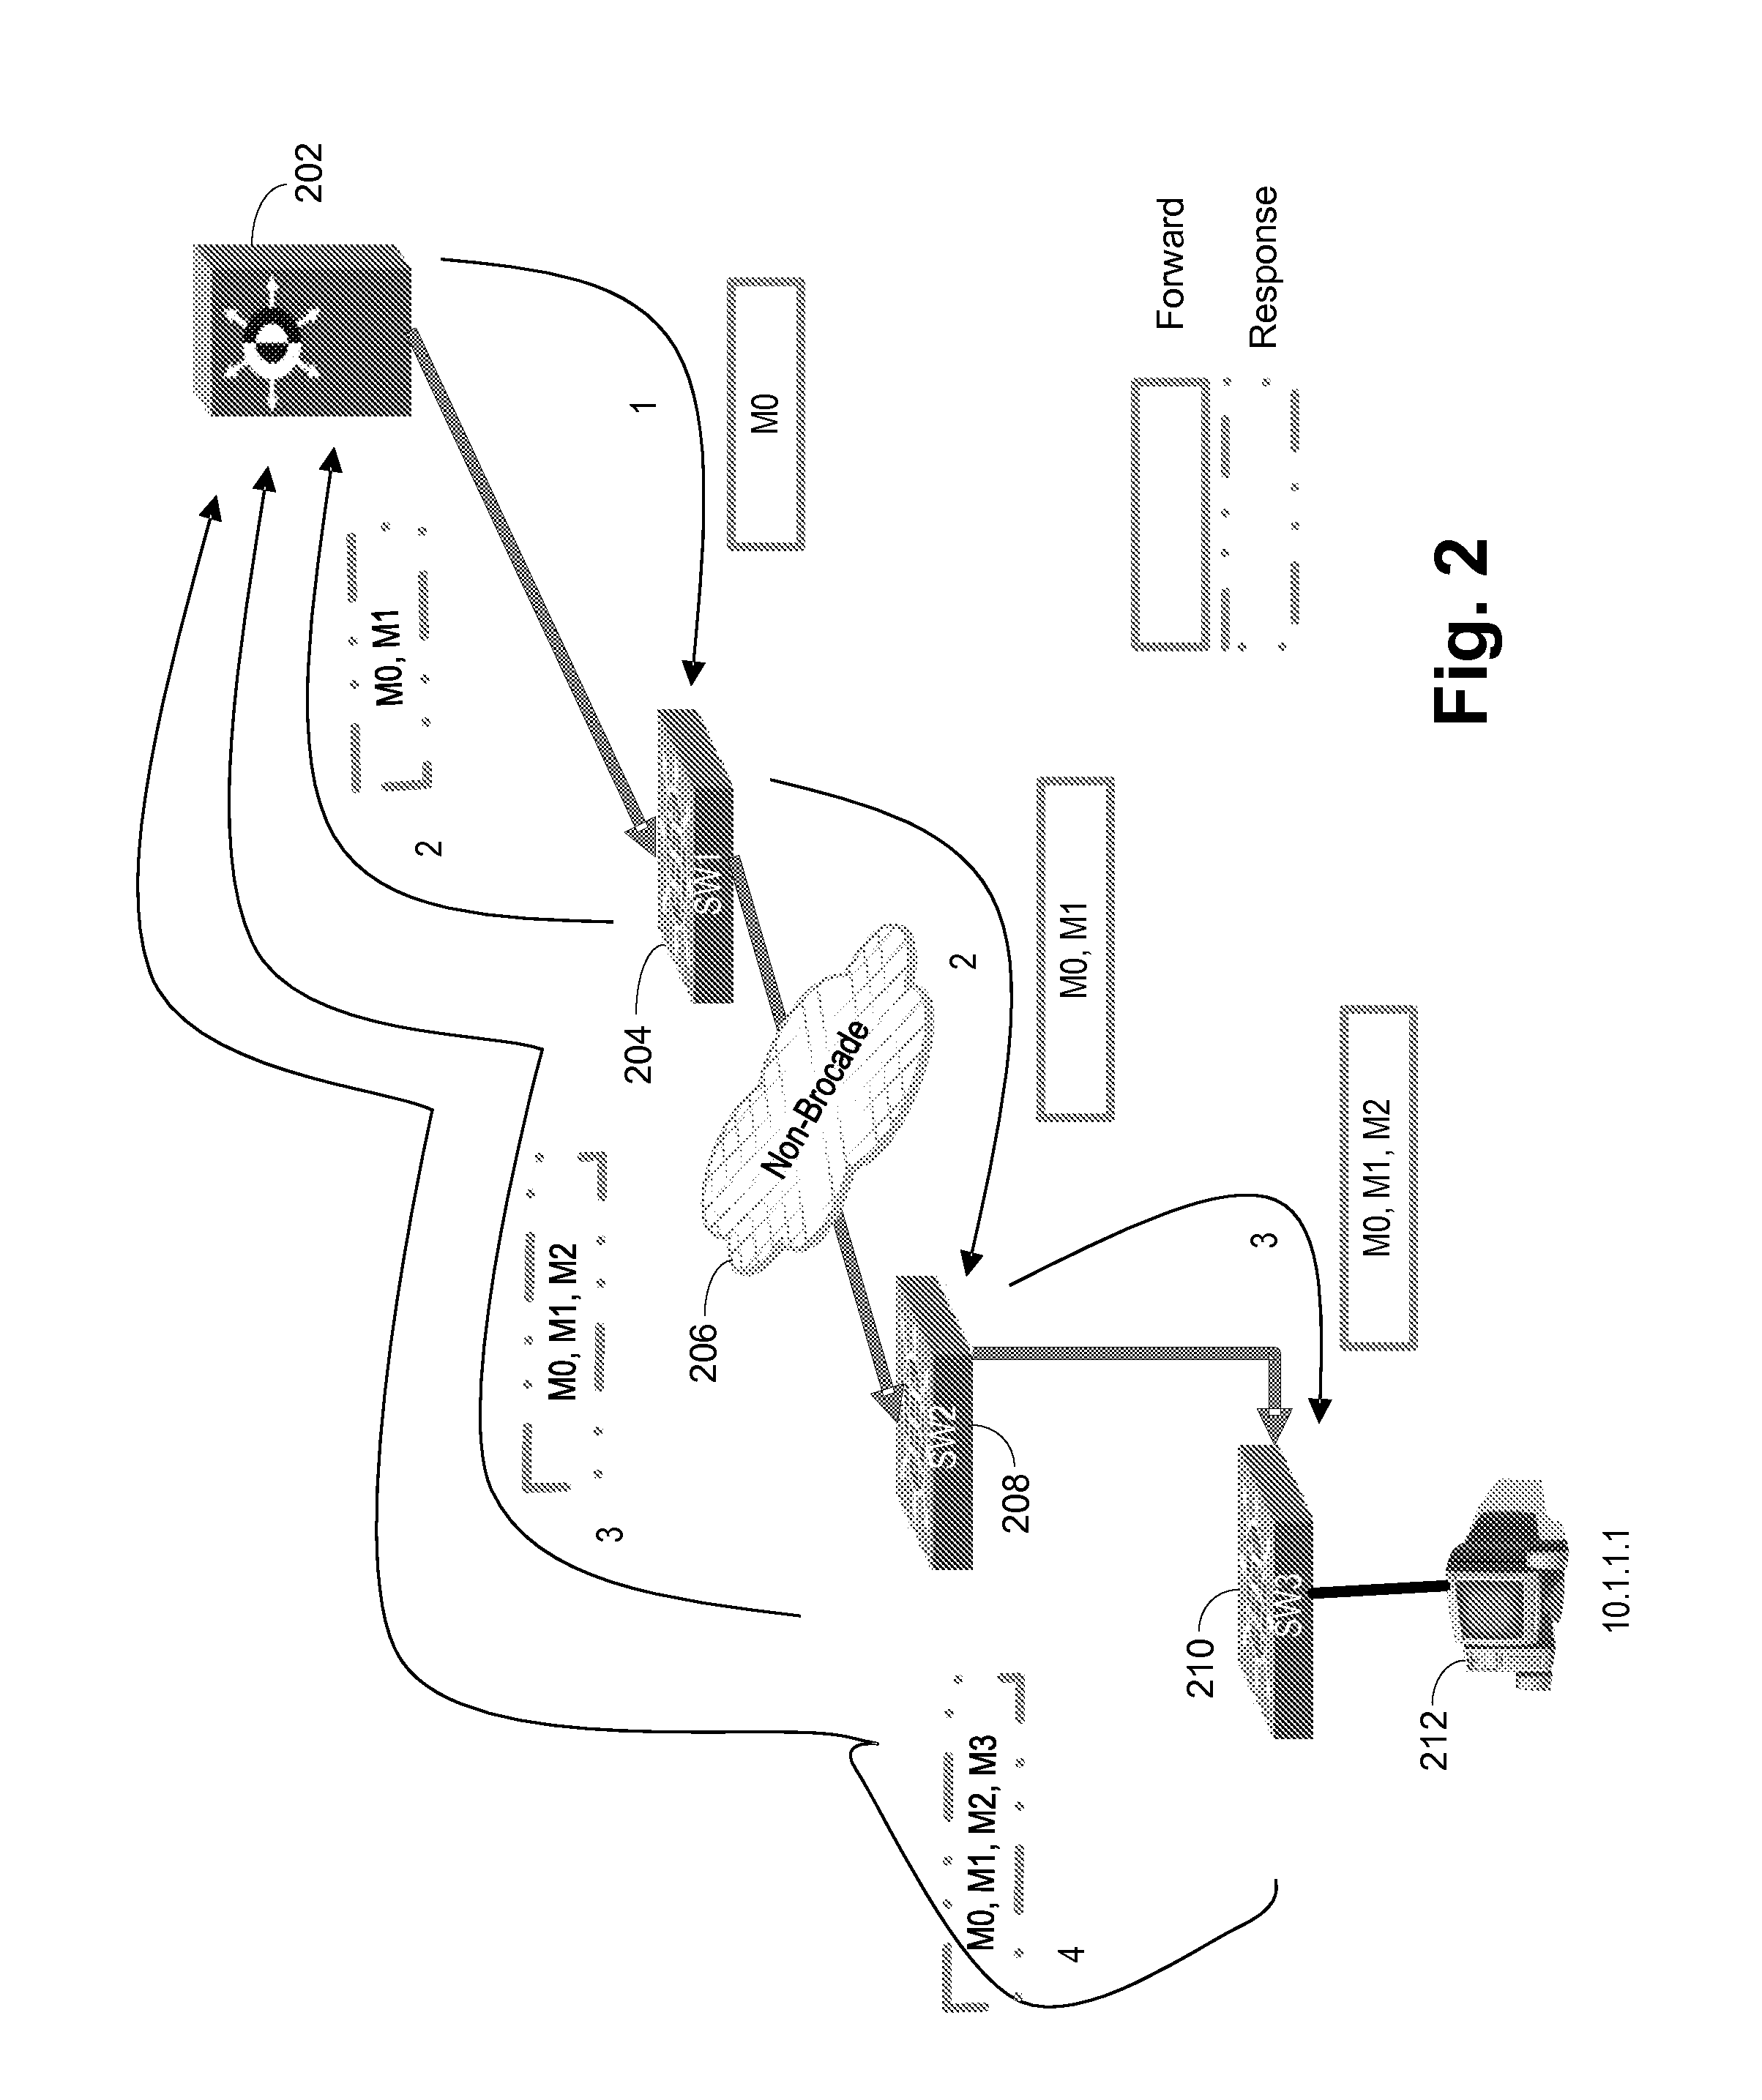 Packet tracing through control and data plane operations